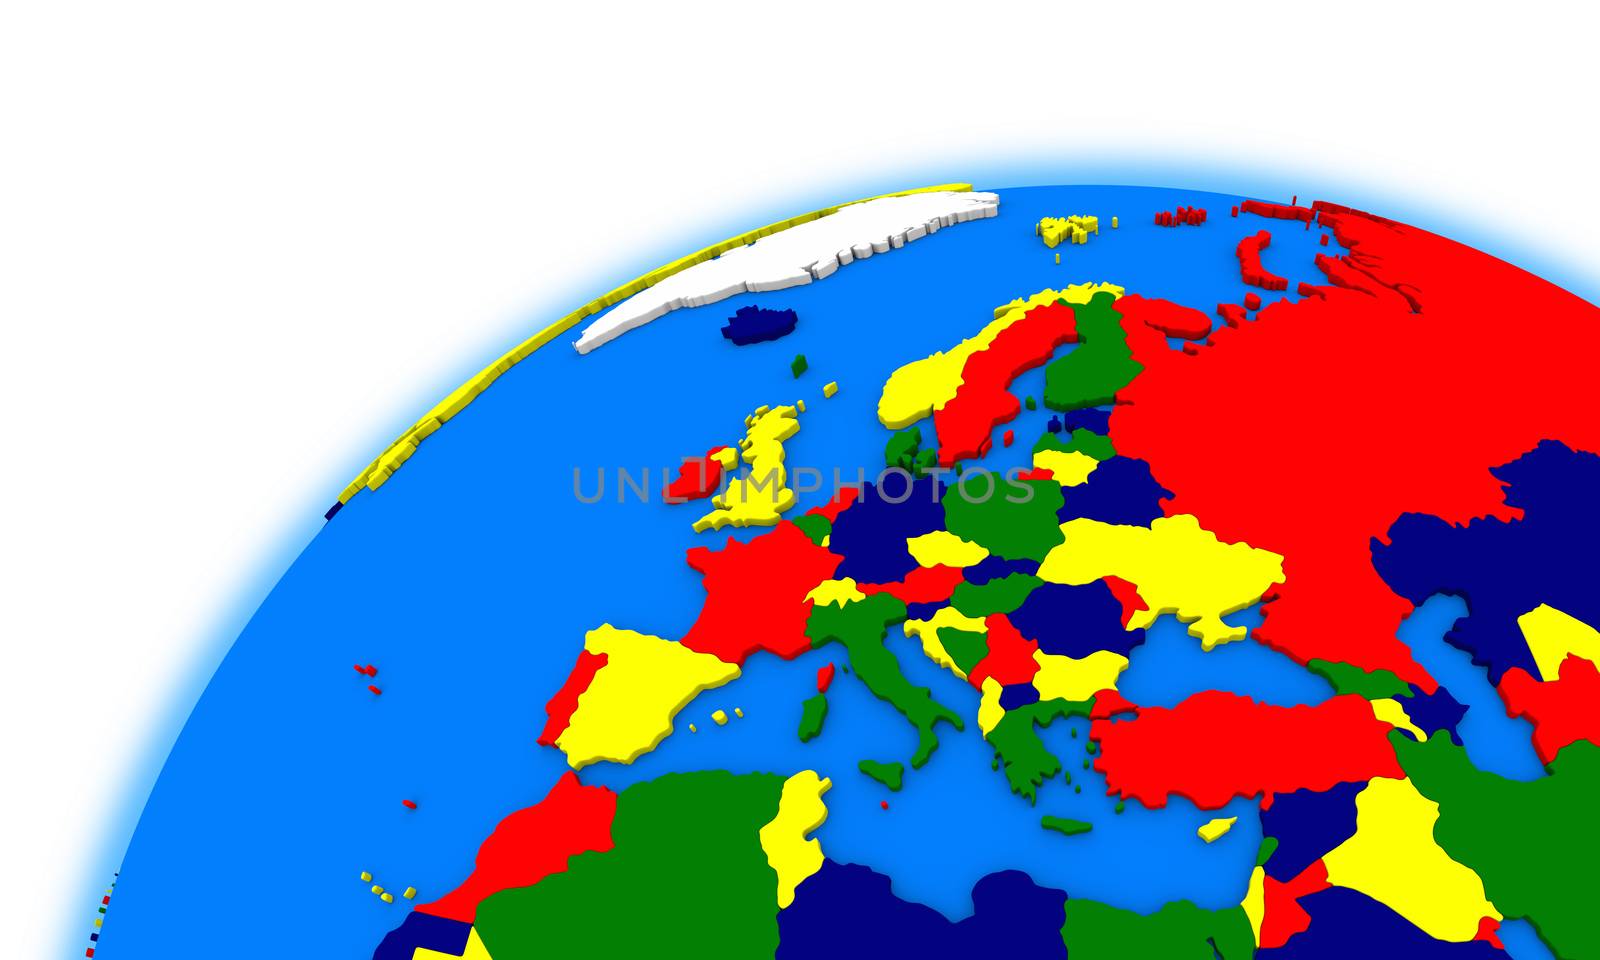 Europe on globe political map by Harvepino